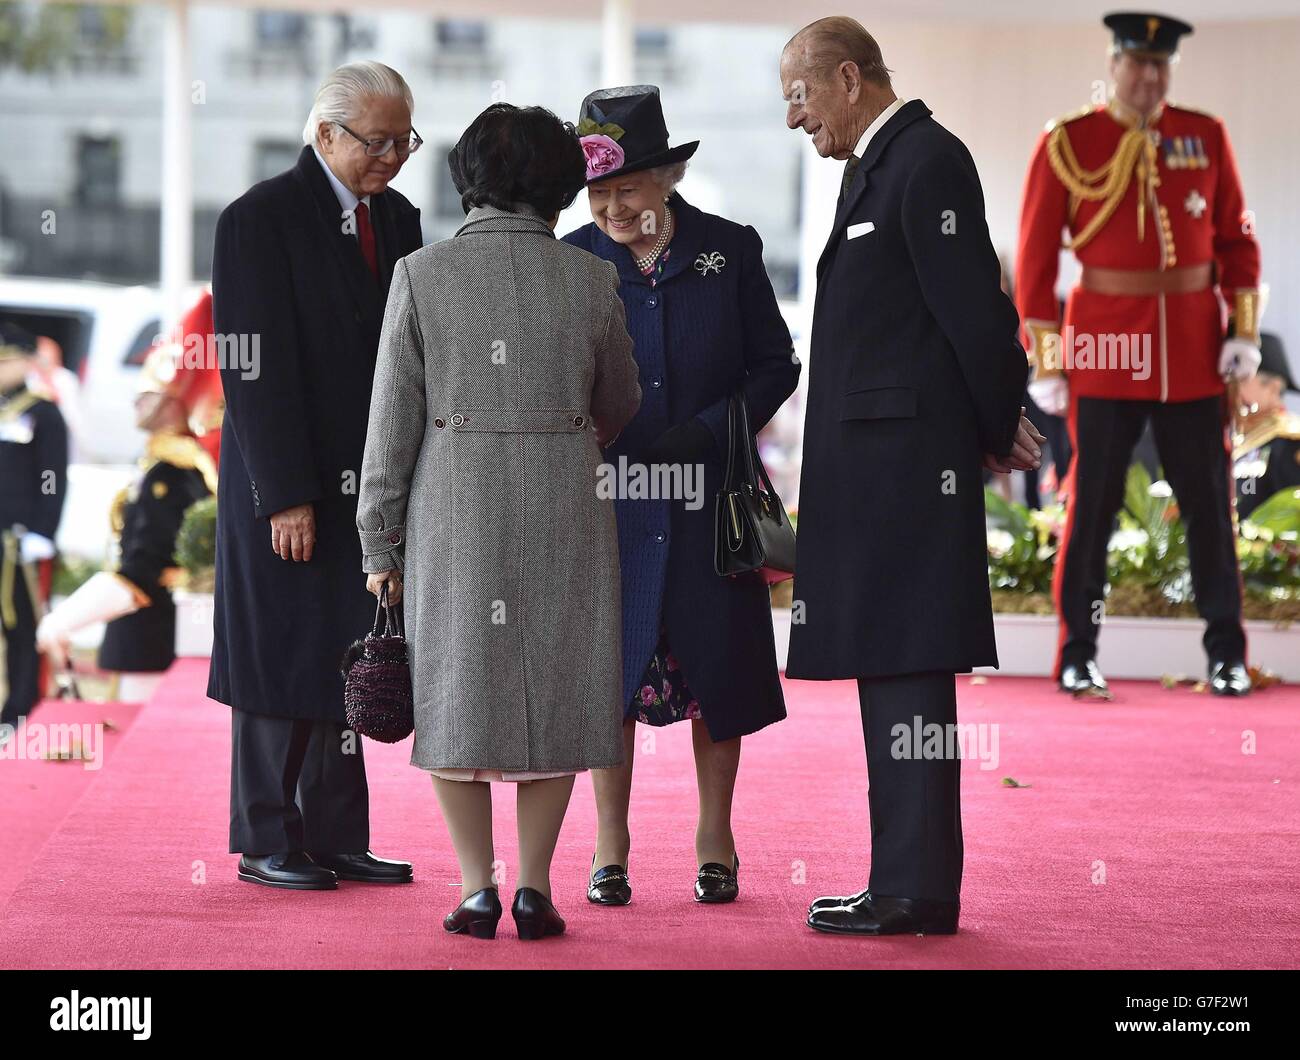 Queen Elizabeth II and the Duke of Edinburgh (right) greet the President of Singapore Tony Tan Keng Yam (left) and his wife Mary Chee (left) during a ceremonial welcome at Horse Guards Parade in London on the first of a four day state visit to the Britain. Stock Photo